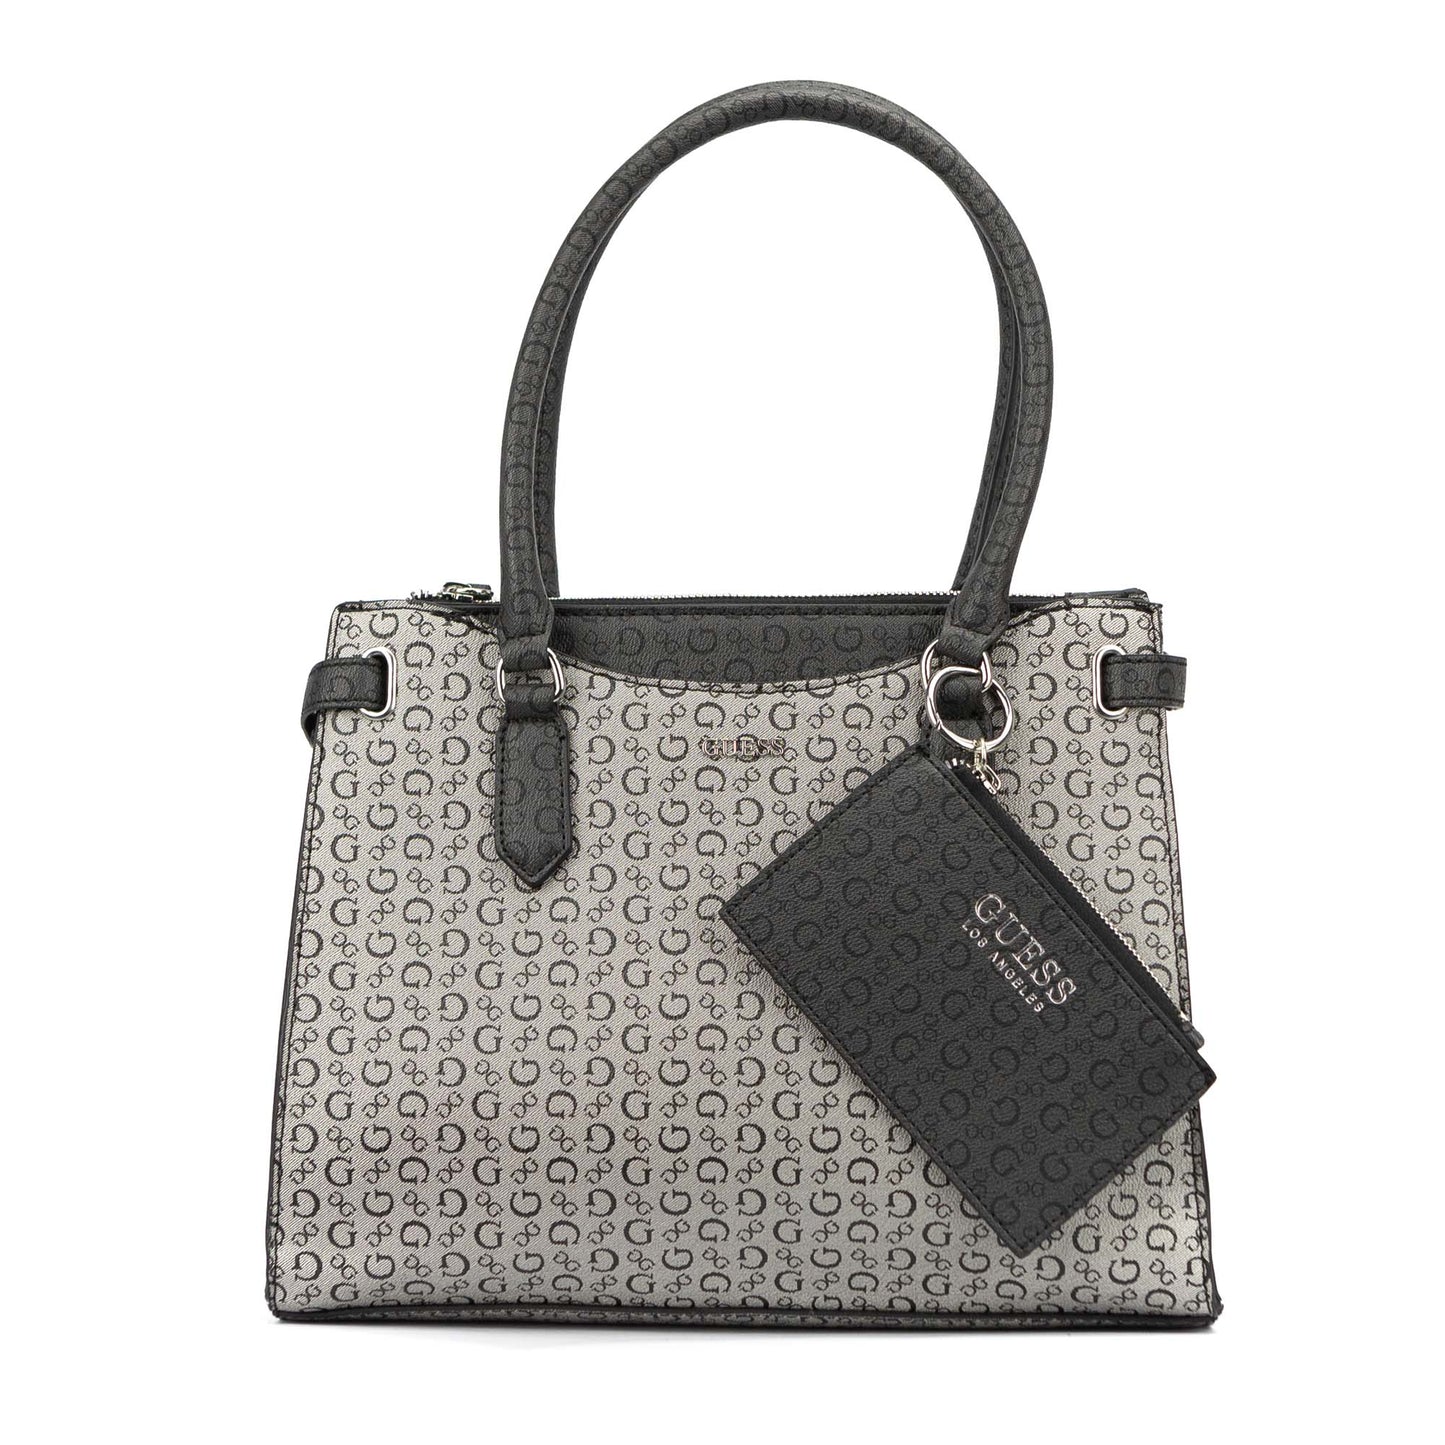 Guess Women's Satchel Bag-  Black and White